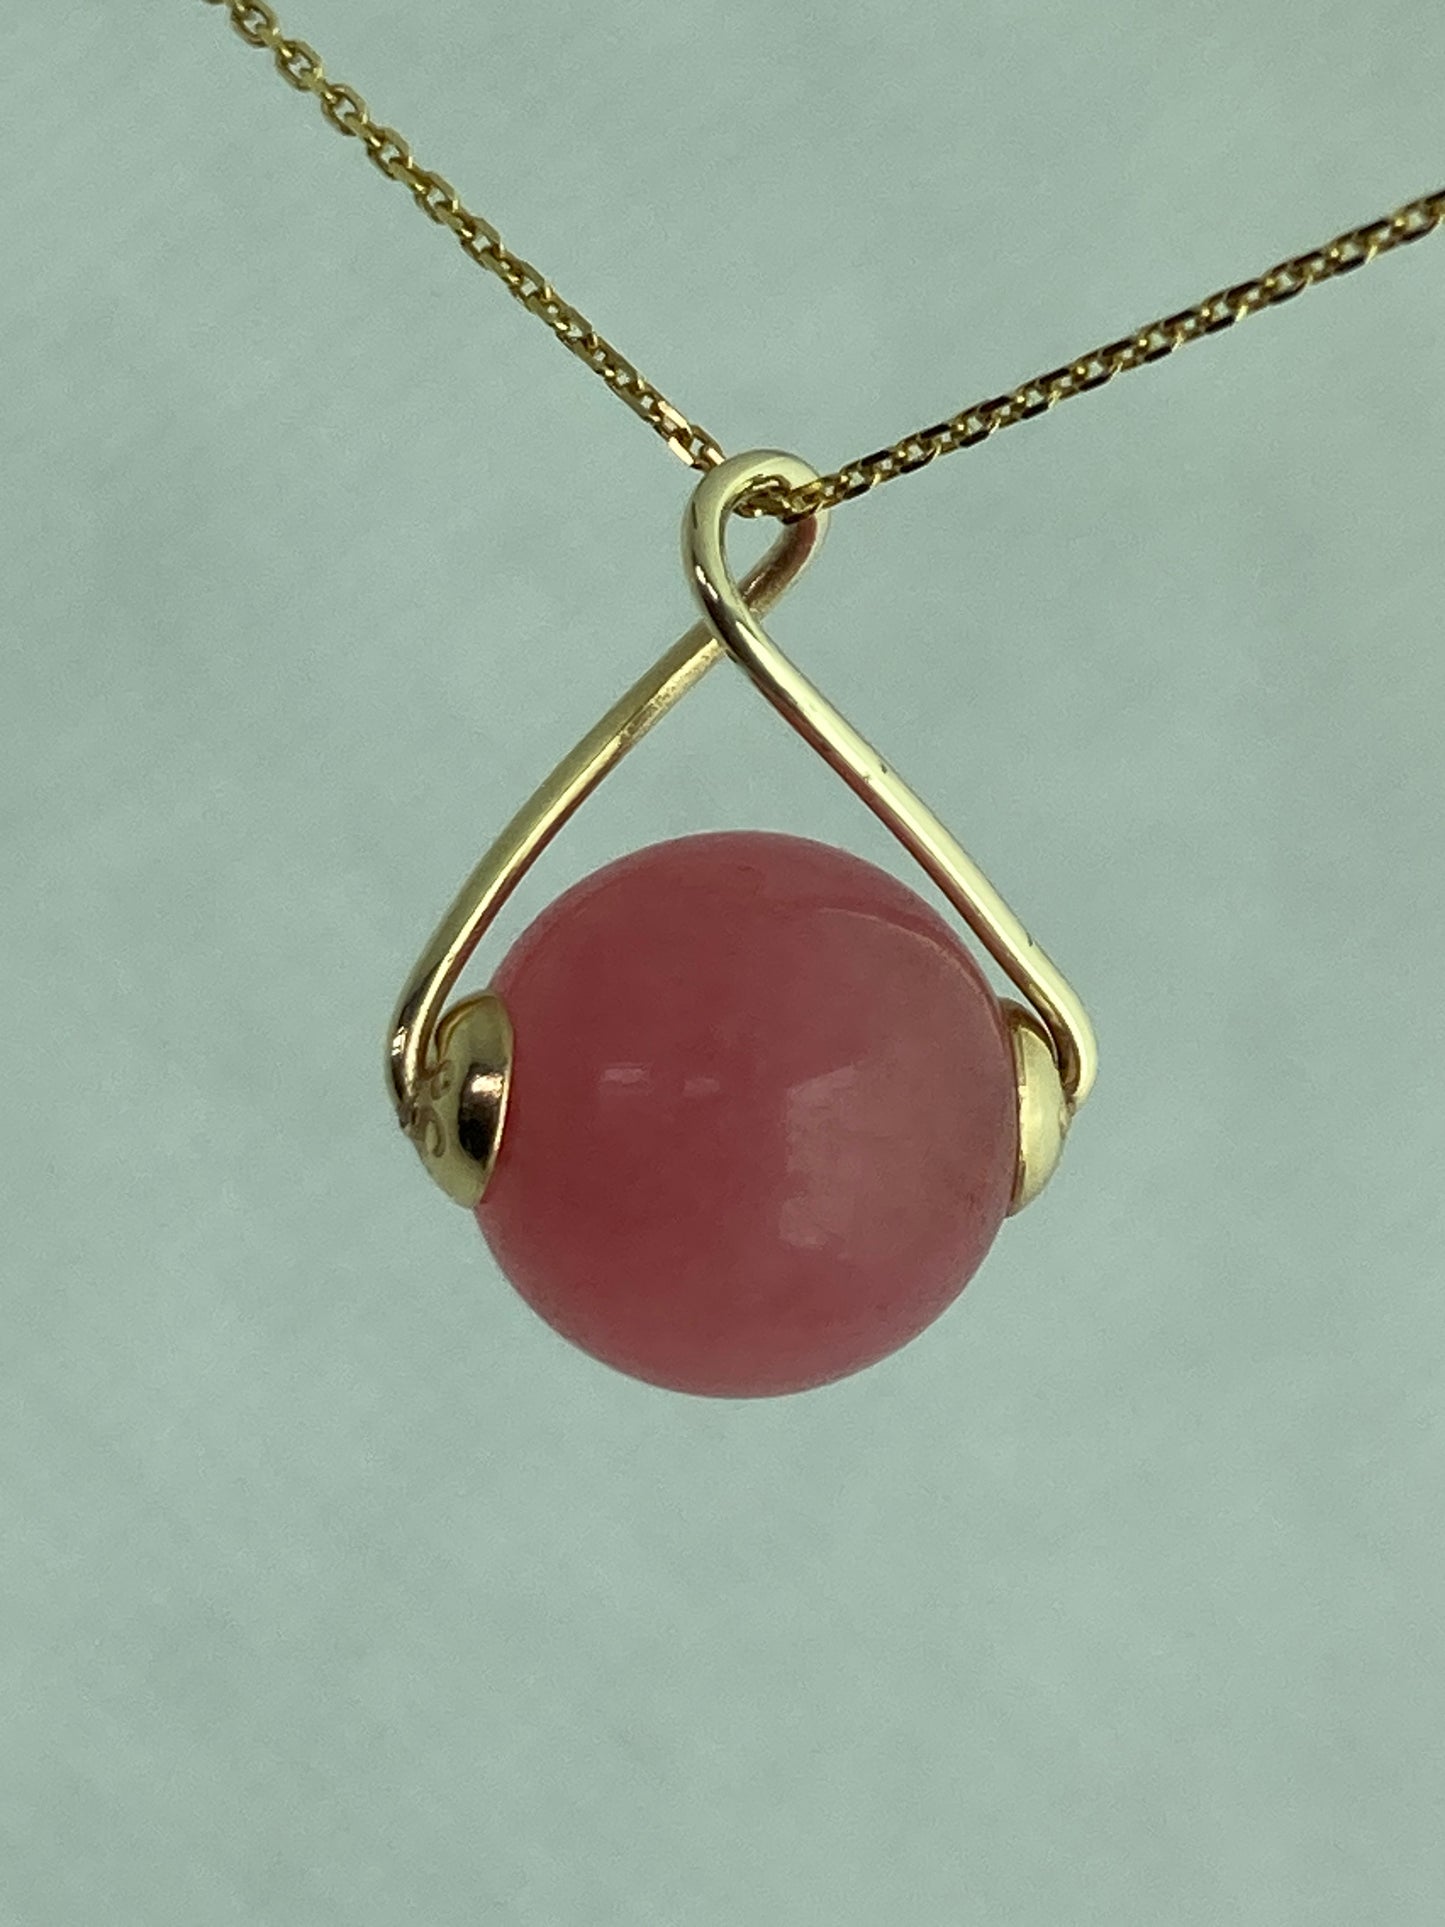 9ct gold pink Jade necklace , 18” chain